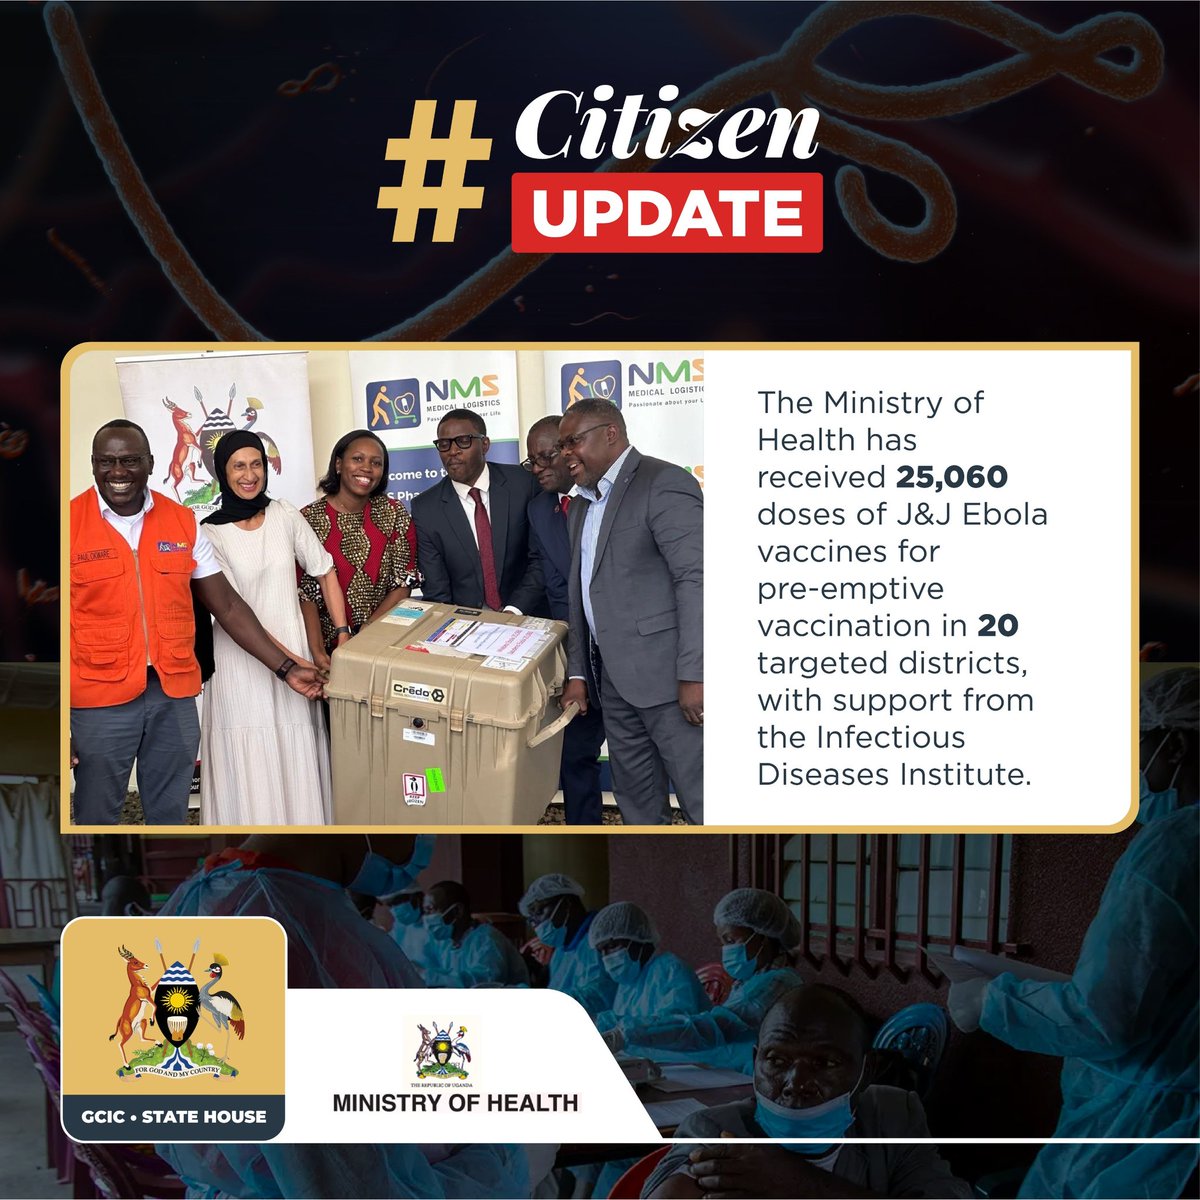 JUST IN!
The @MinofHealthUG has received 25,060 doses of J&J Ebola vaccines.
#OpenGovtUg